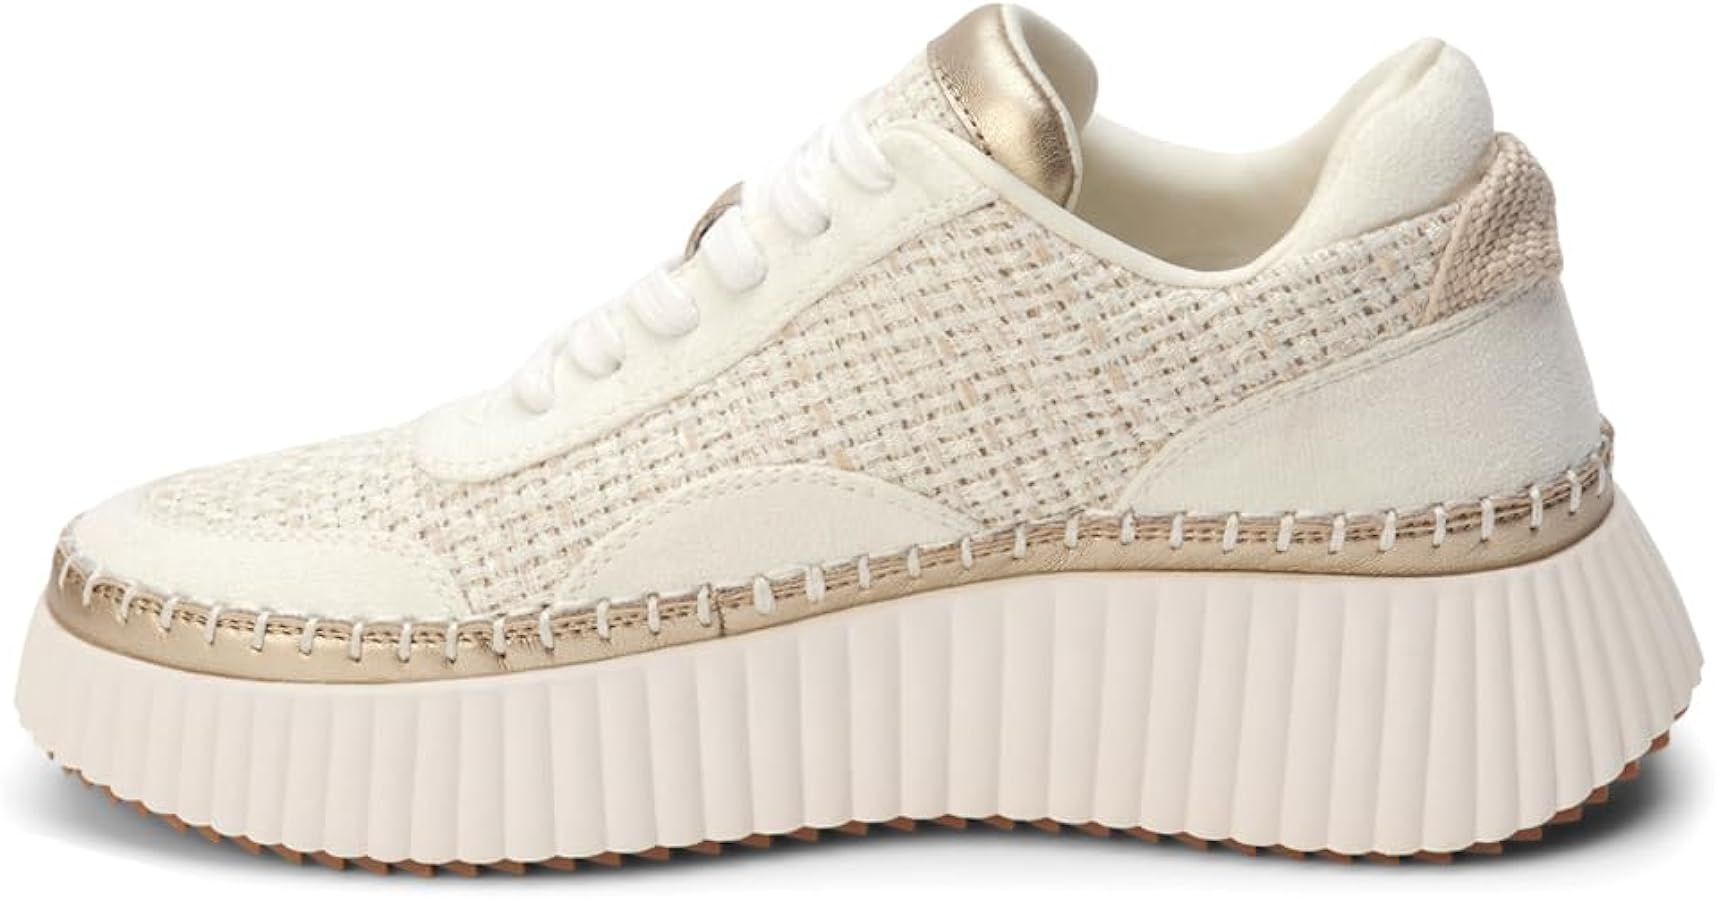 Coconuts by Matisse Womens Go to Platform Lace Up Sneakers Shoes Casual - Beige | Amazon (US)